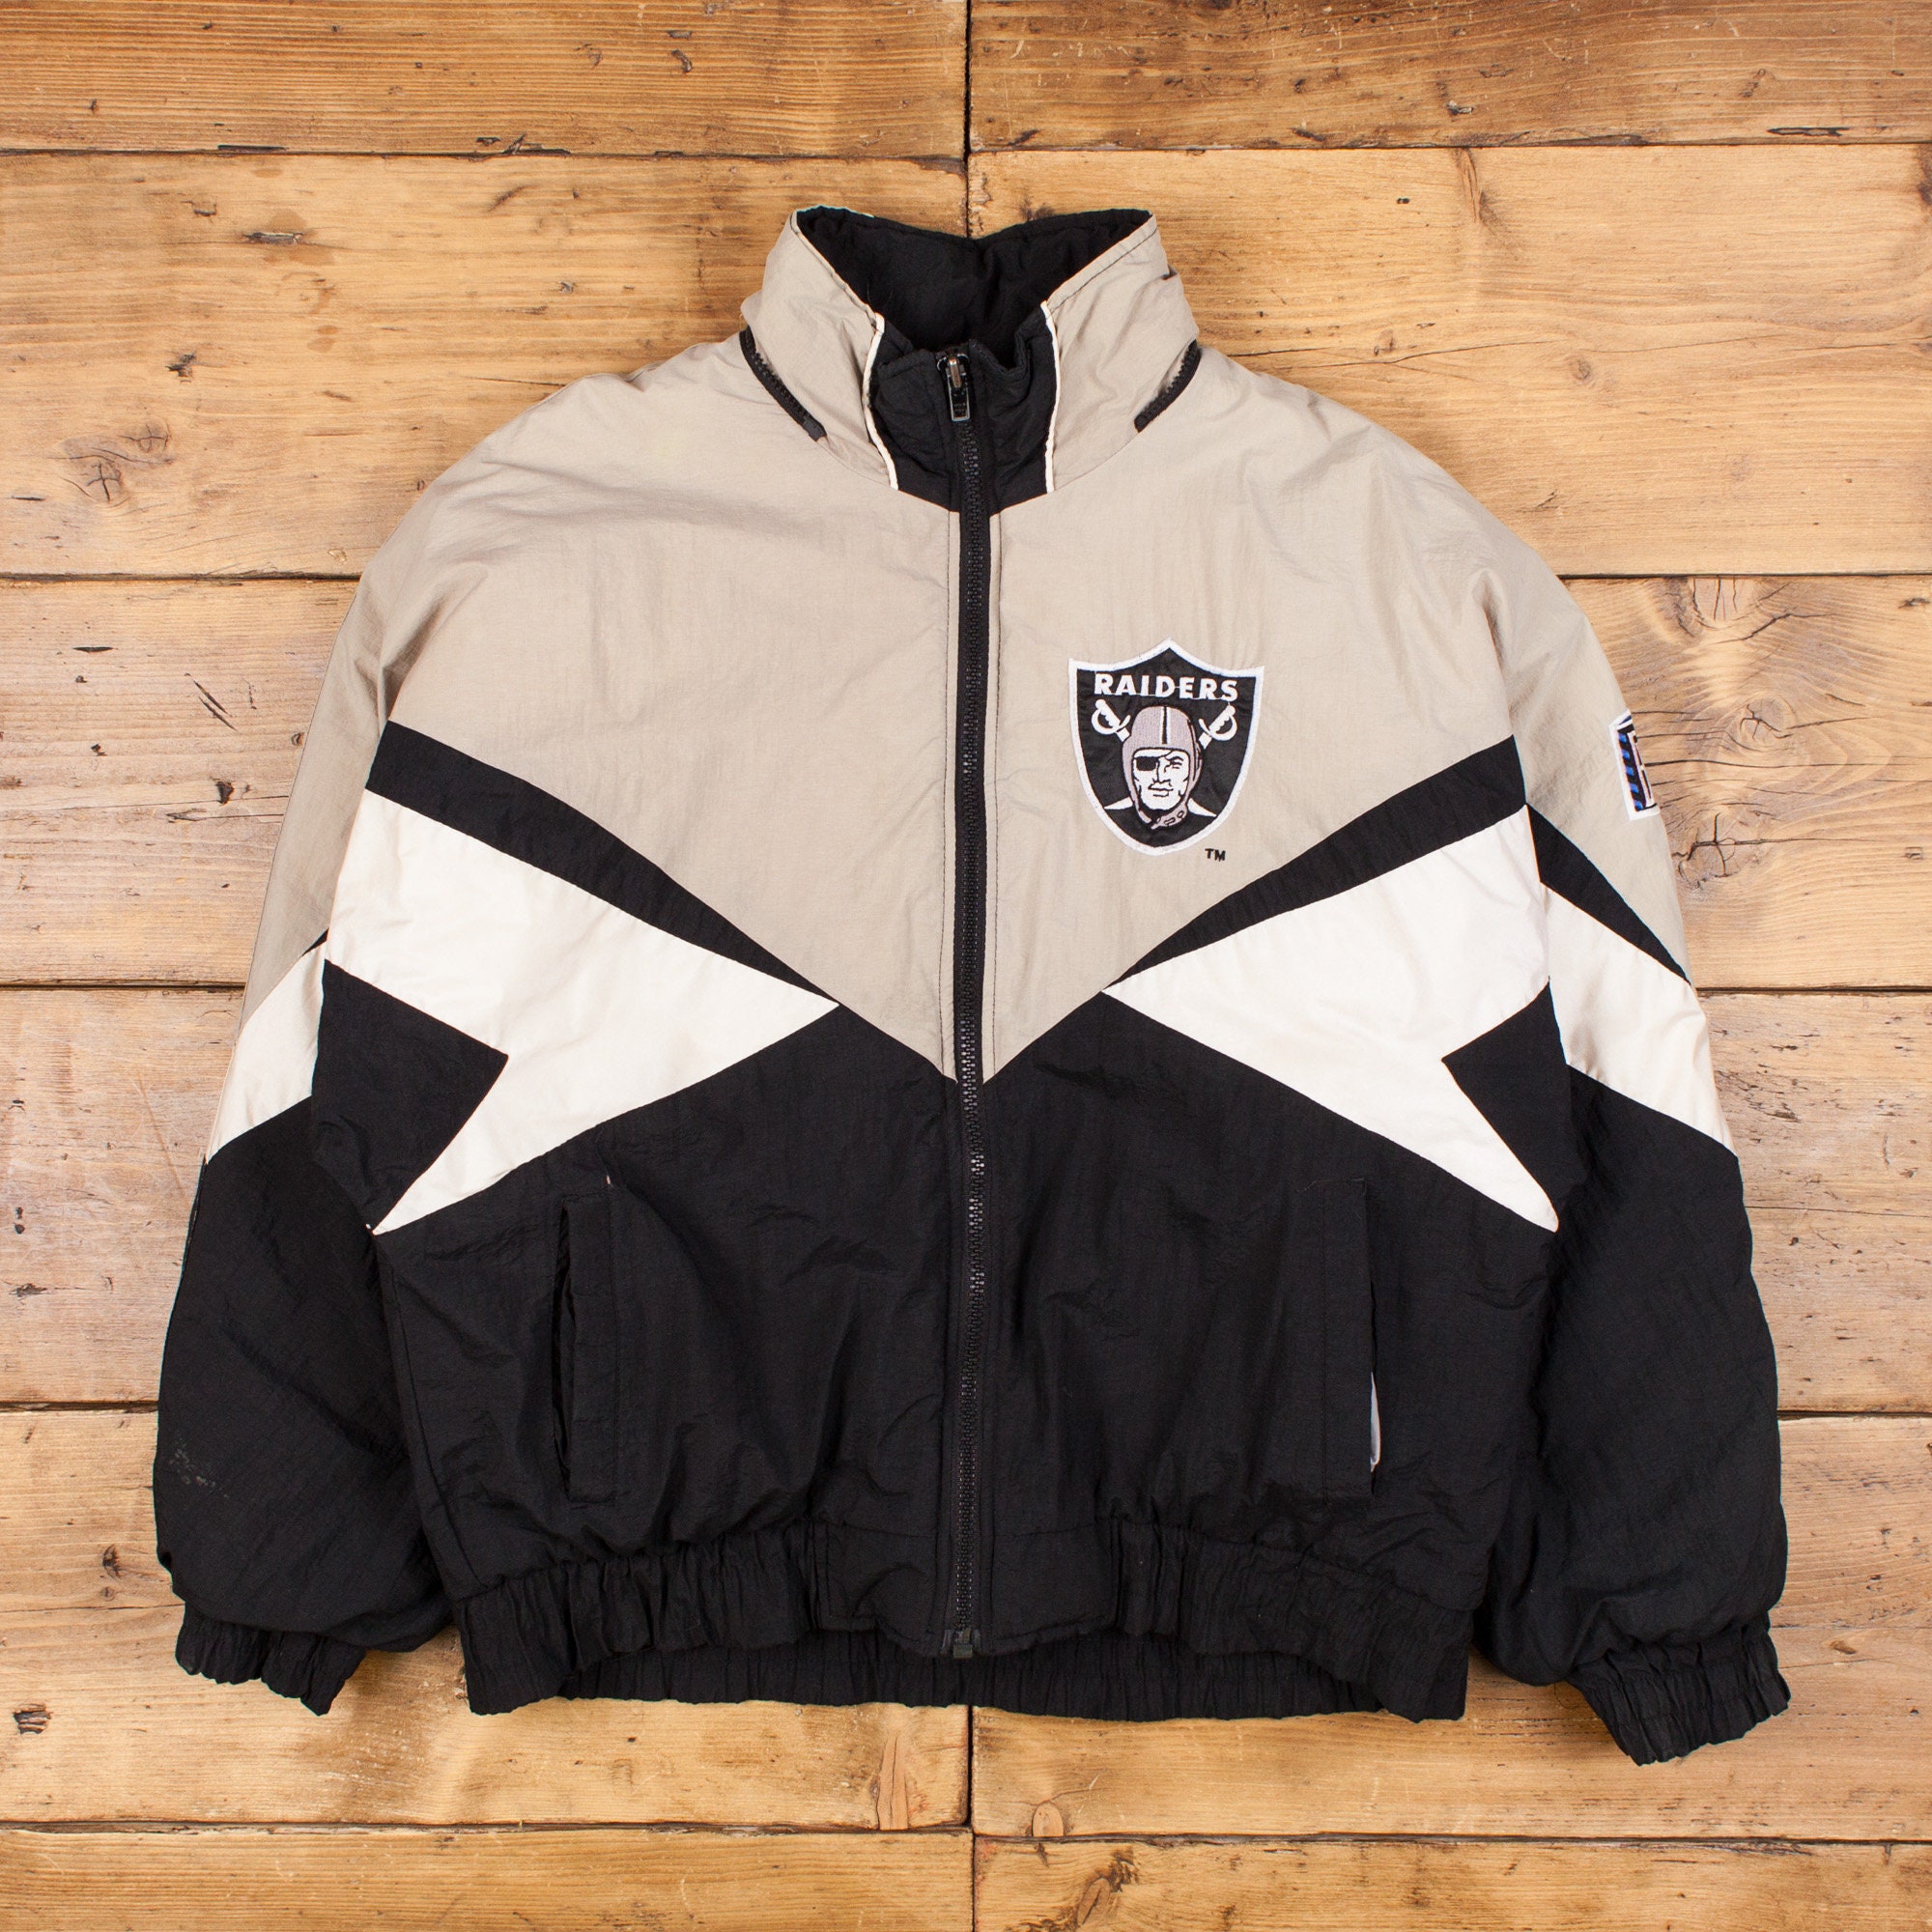 90s Oakland Raiders All Black Button Puffy Jacket - 5 Star Vintage